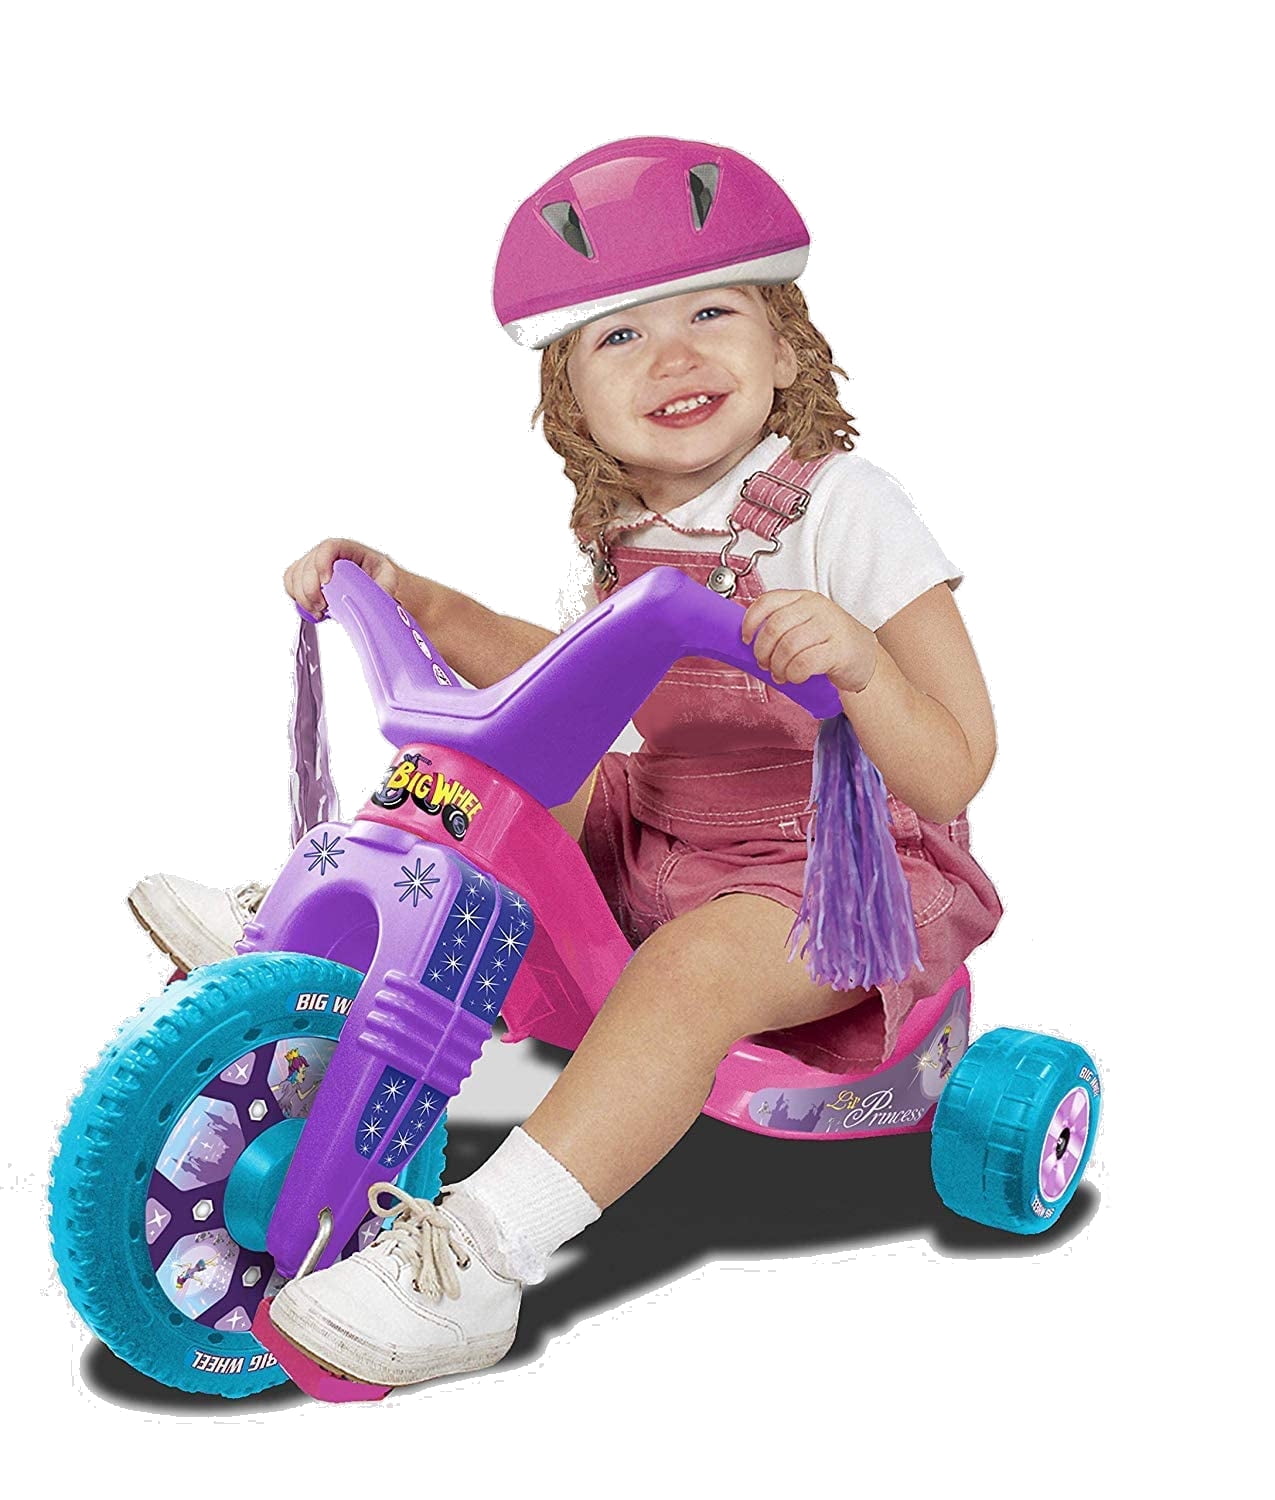 The Original Big Wheel Junior Tricycle Mid-Size Princess 11 Ride-On for Girls 